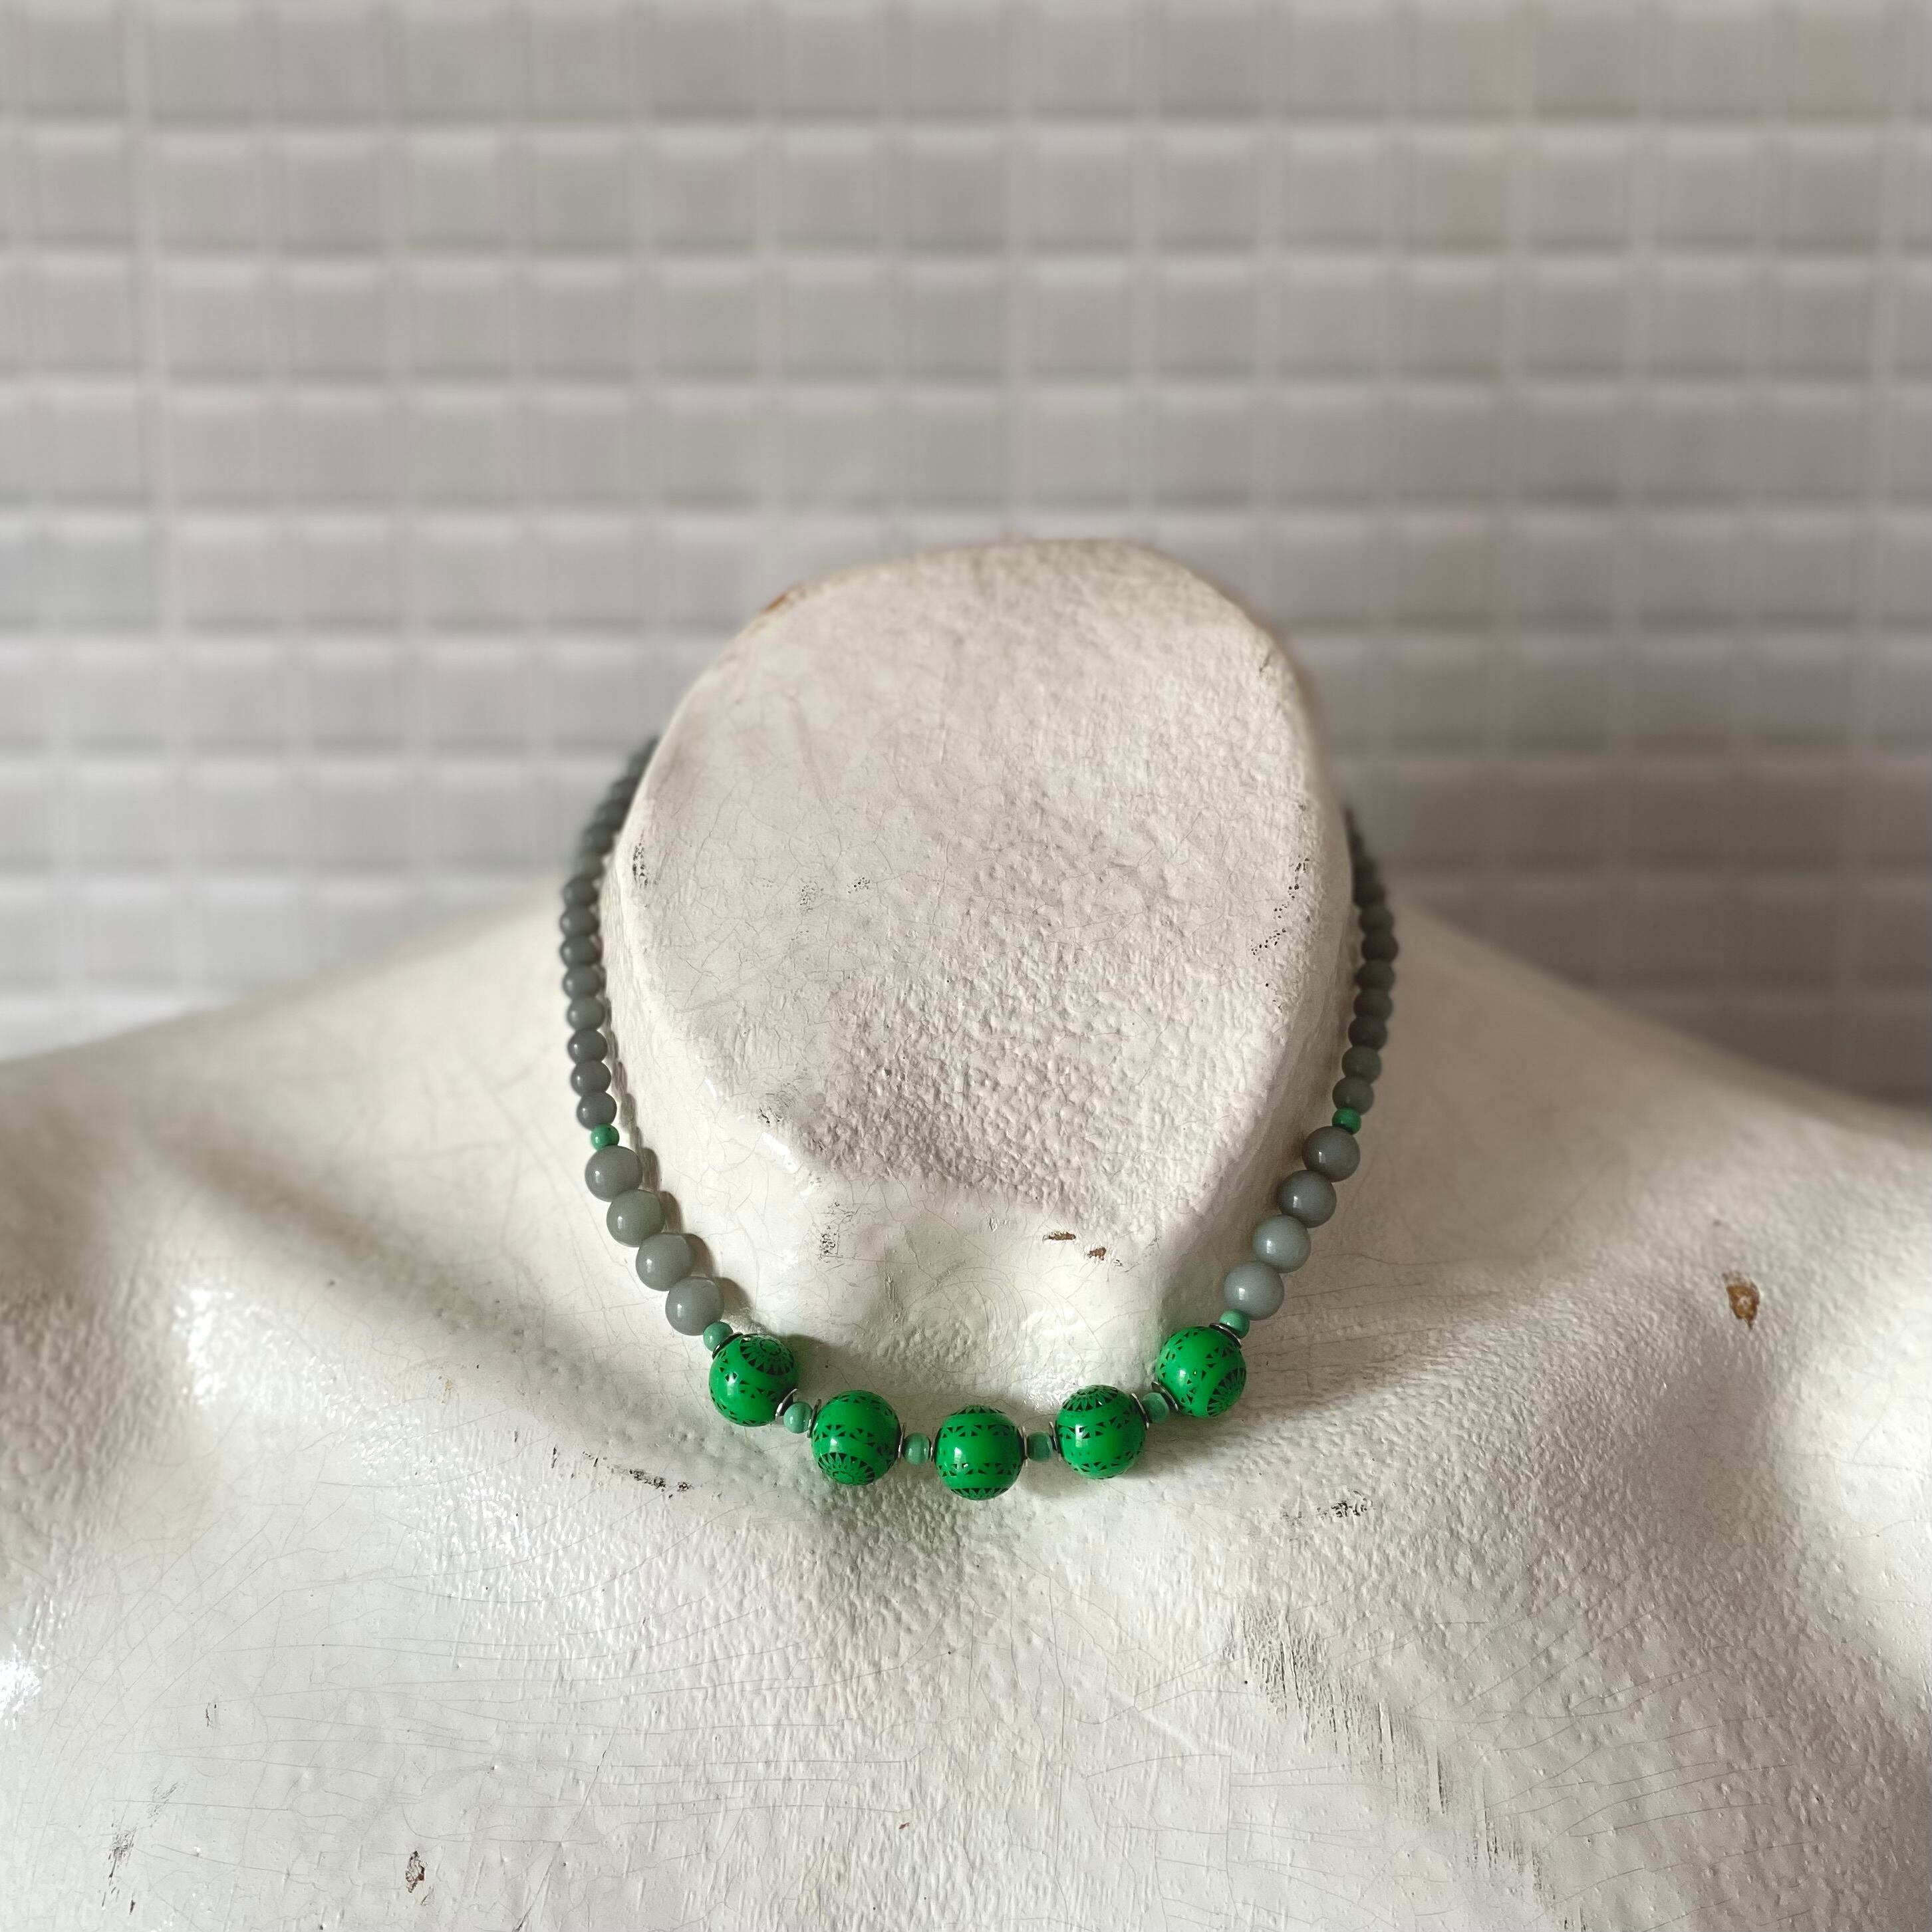 Vintage 80s〜90s retro green beads design necklace レトロ ヴィンテージ グリーン ビーズ デザイン  ネックレス